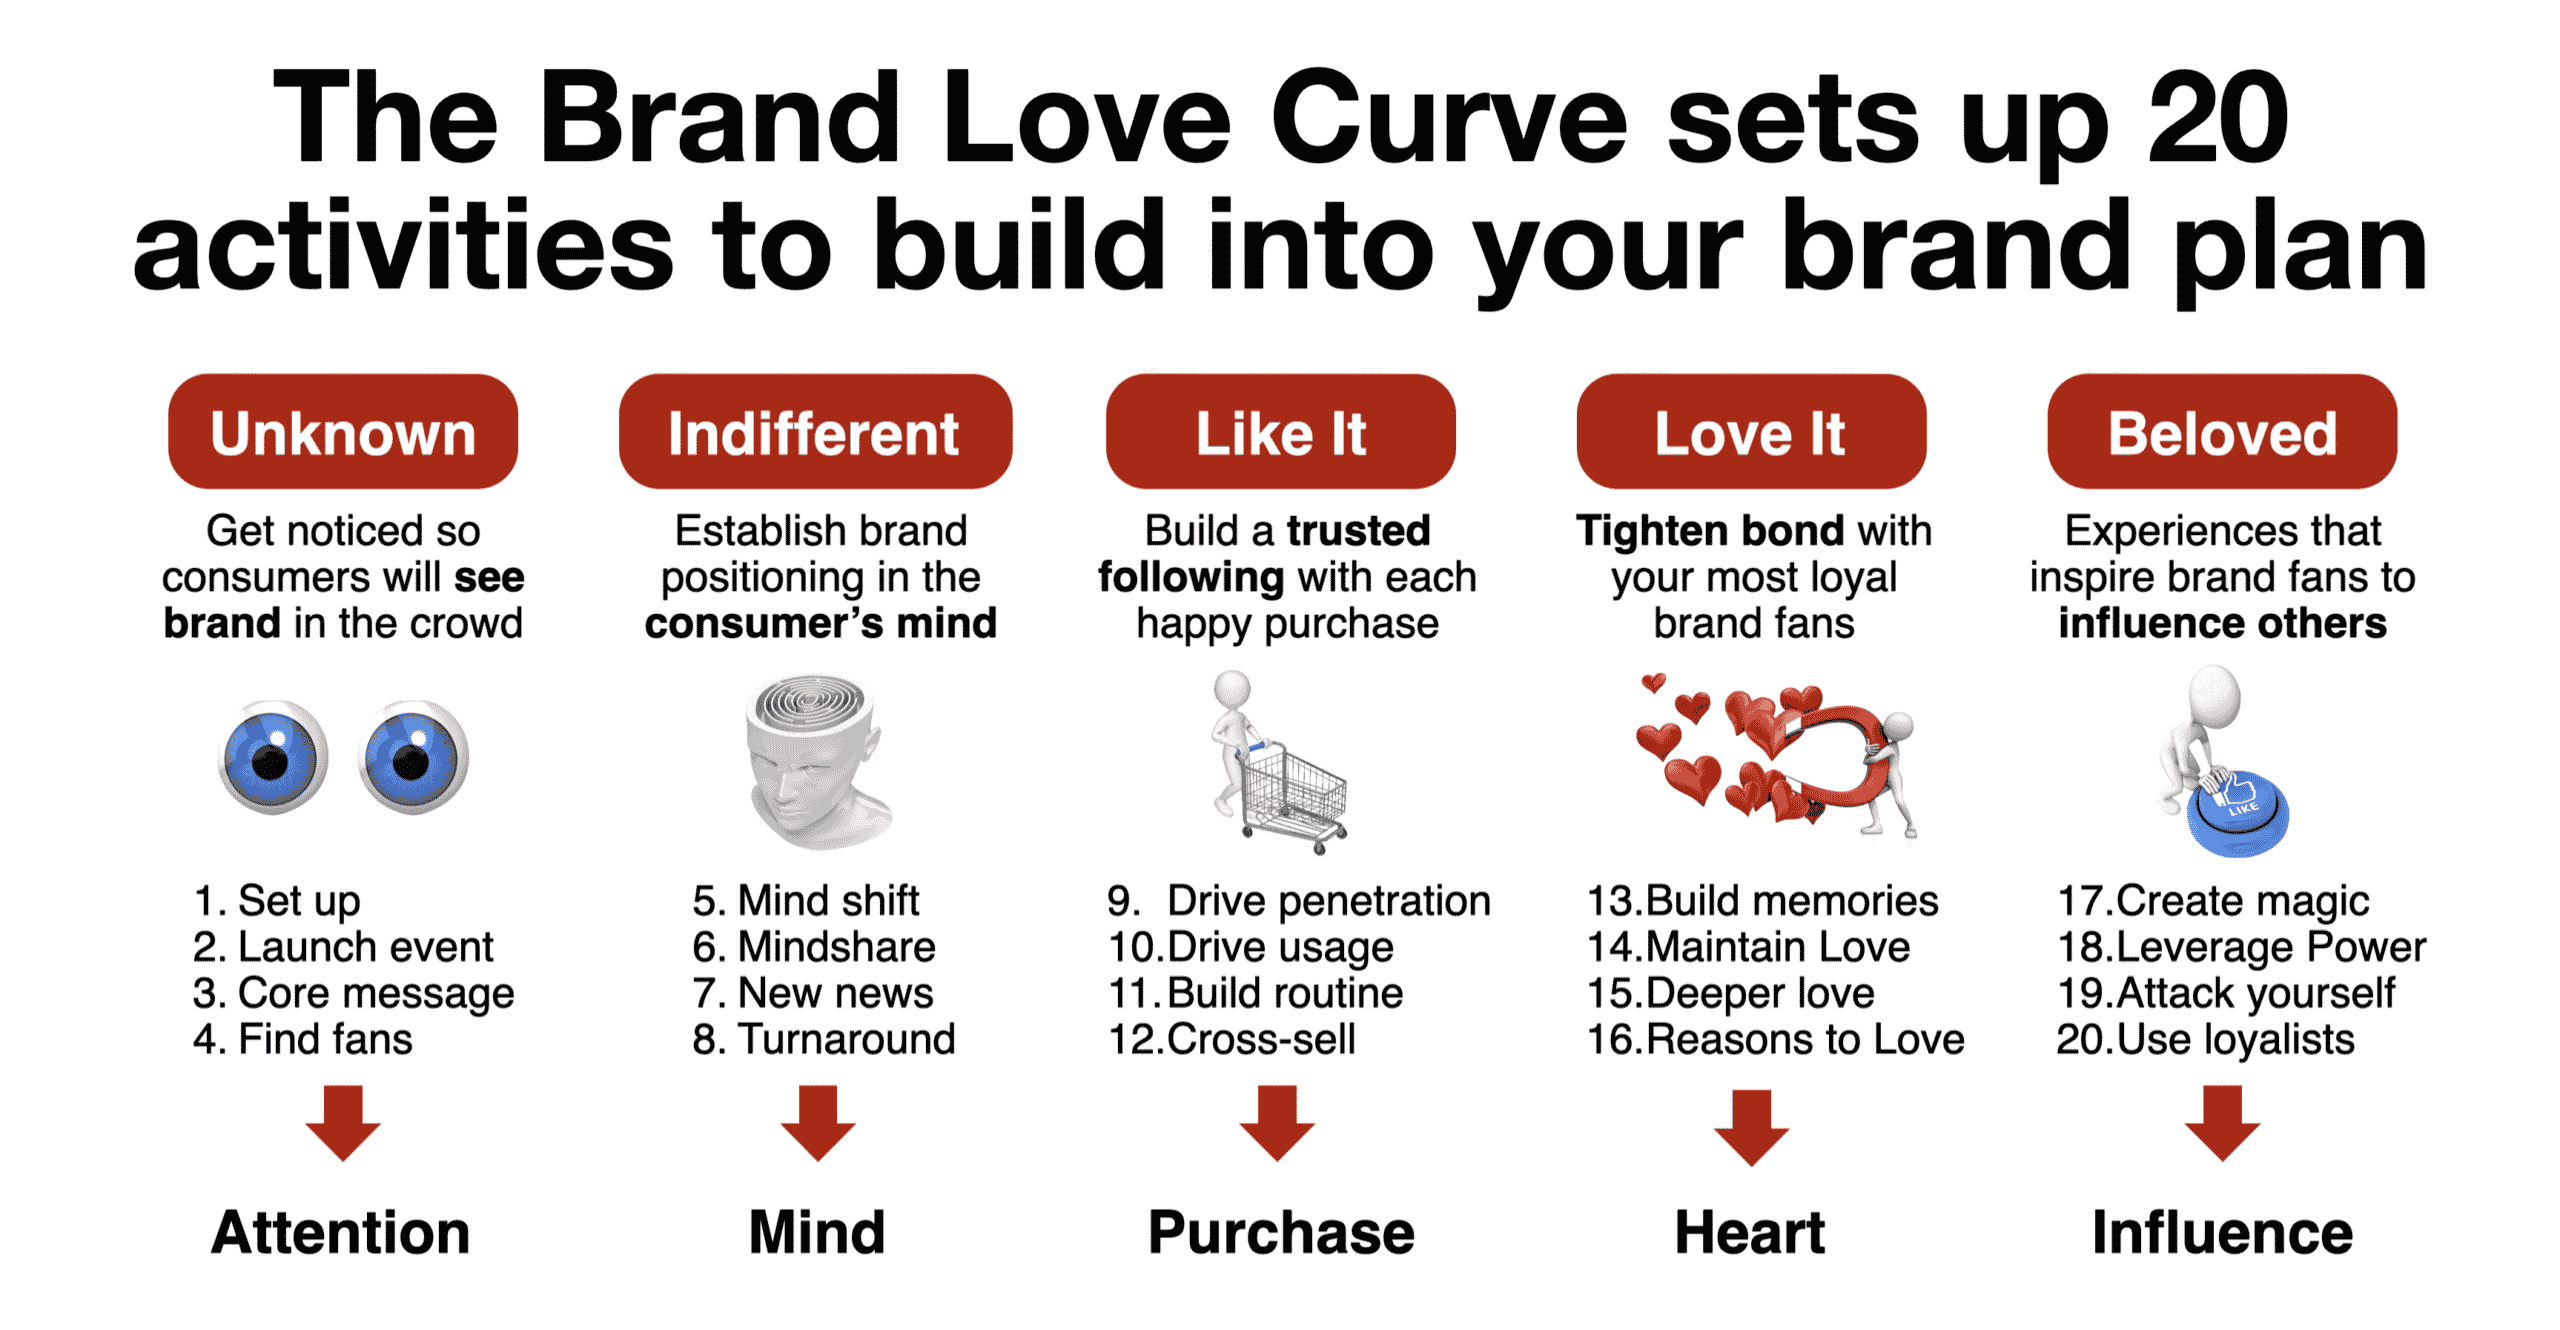 The Brand Love Curve sets up activities